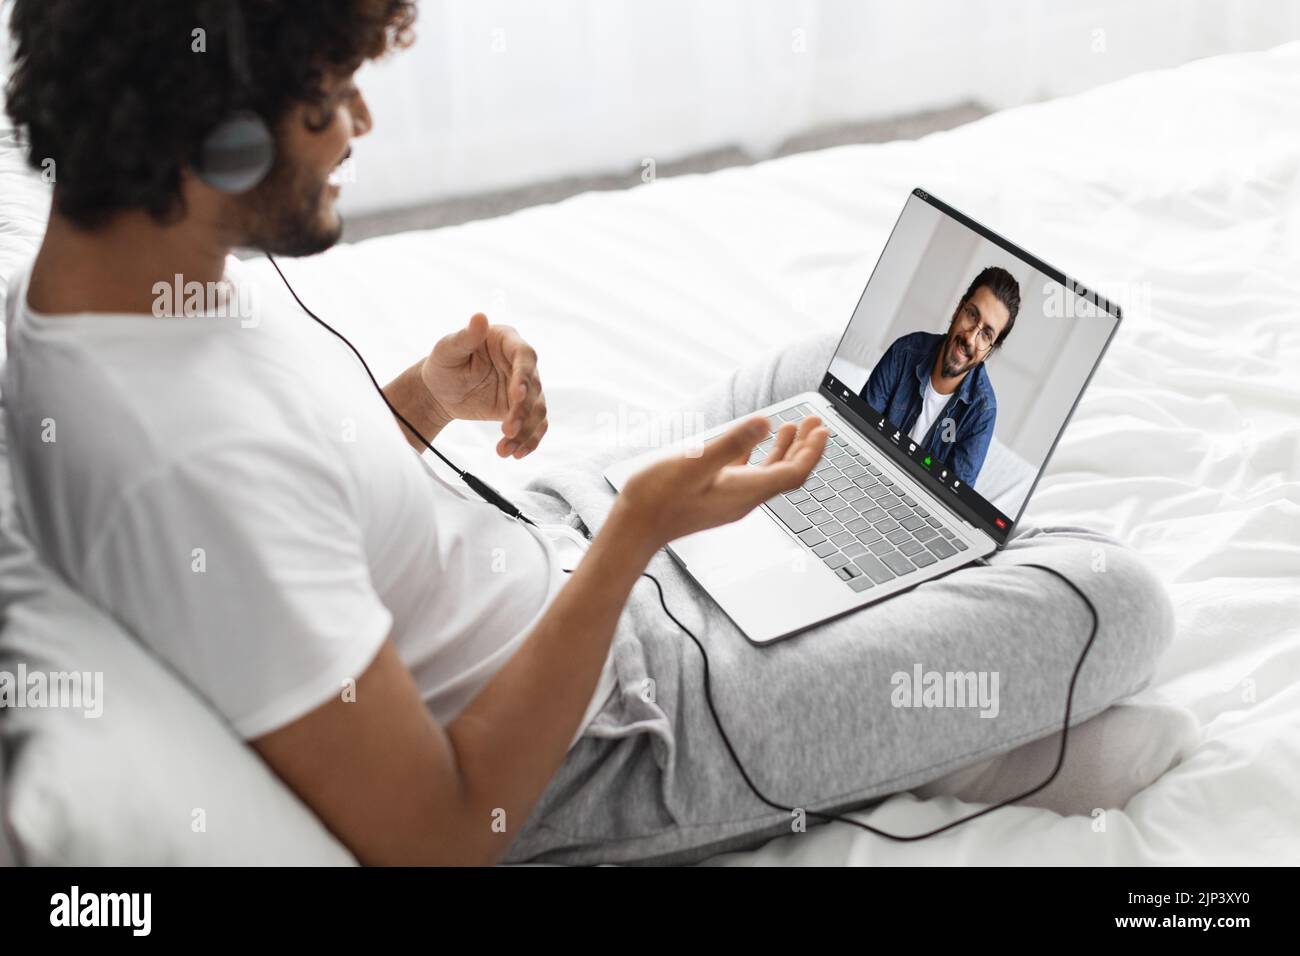 Indian guy having video call with his friend, using laptop Stock Photo